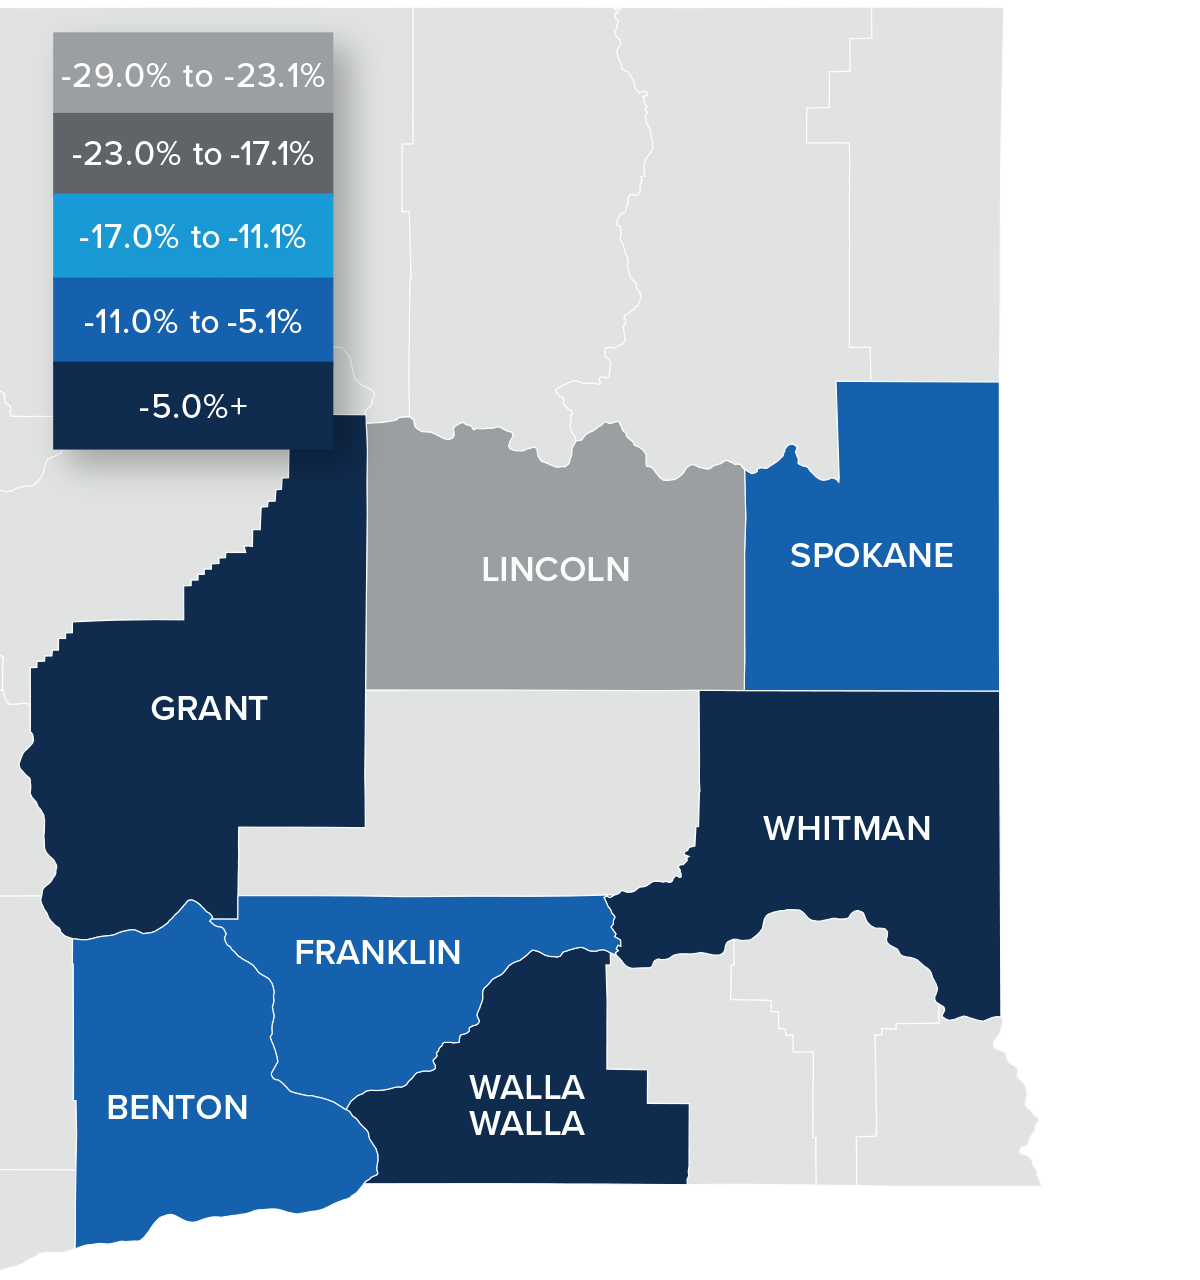 A map showing the real estate home prices percentage changes for various counties in Eastern Washington. Different colors correspond to different tiers of percentage change. Lincoln County has a percentage change in the -29% to -23.1% range, Spokane, Franklin, and Benton are in the -11% to -5.1% change range, and Whitman, Walla Walla, and Grant are in the 5%+ change range.